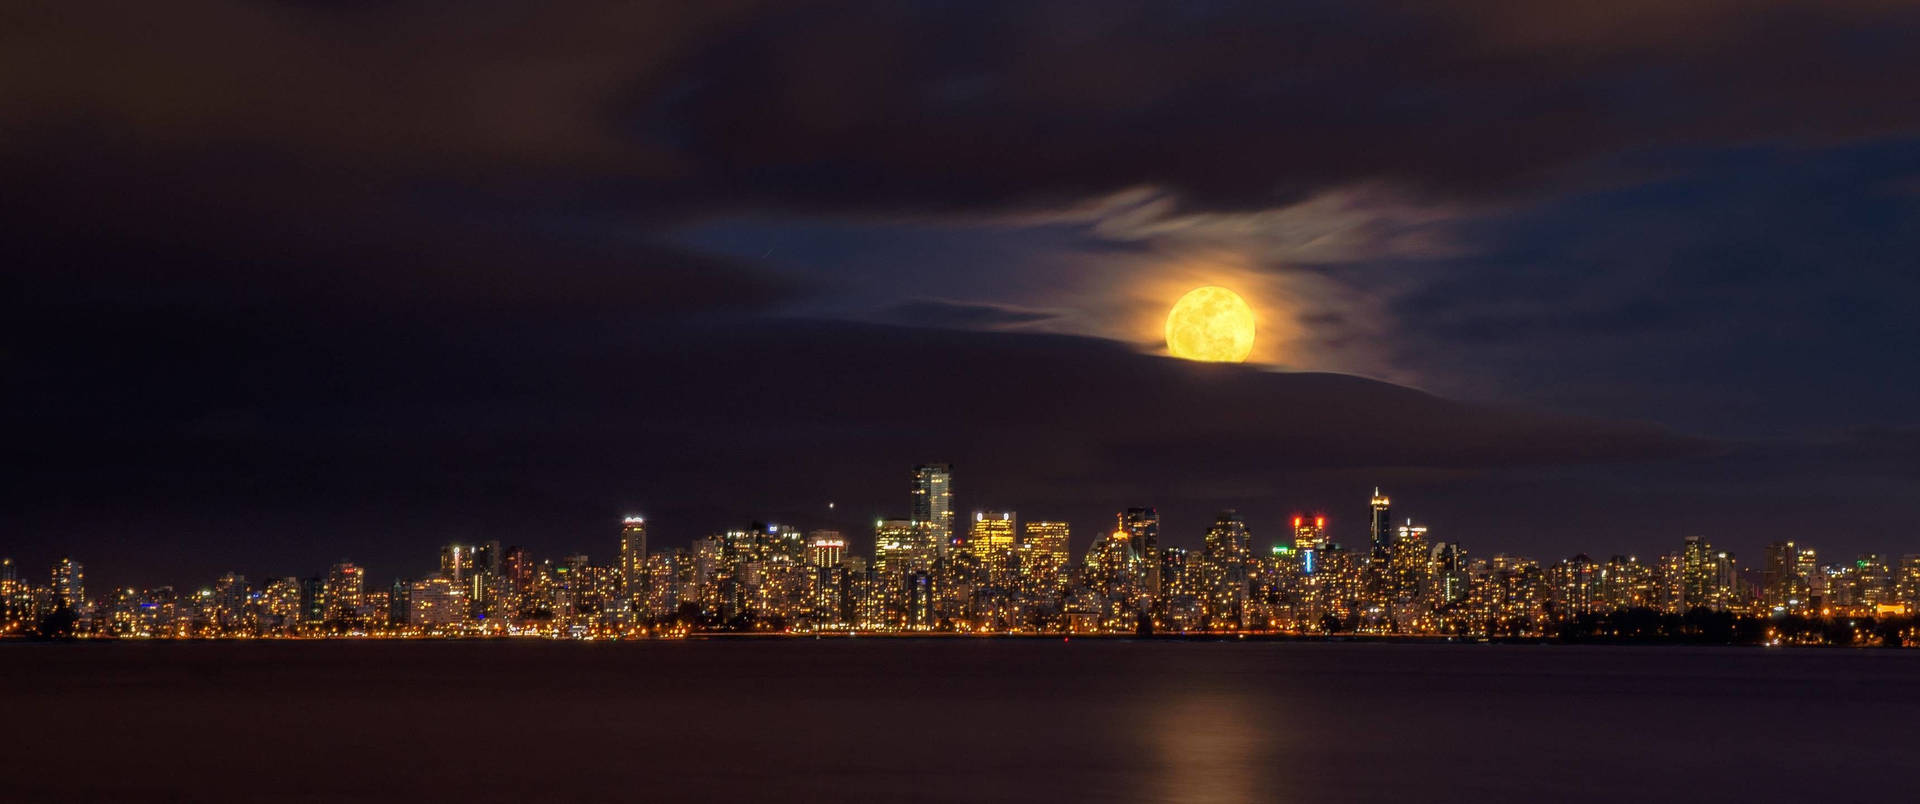 Ultrawide view of city from afar with yellow moon on a dark gloomy sky.